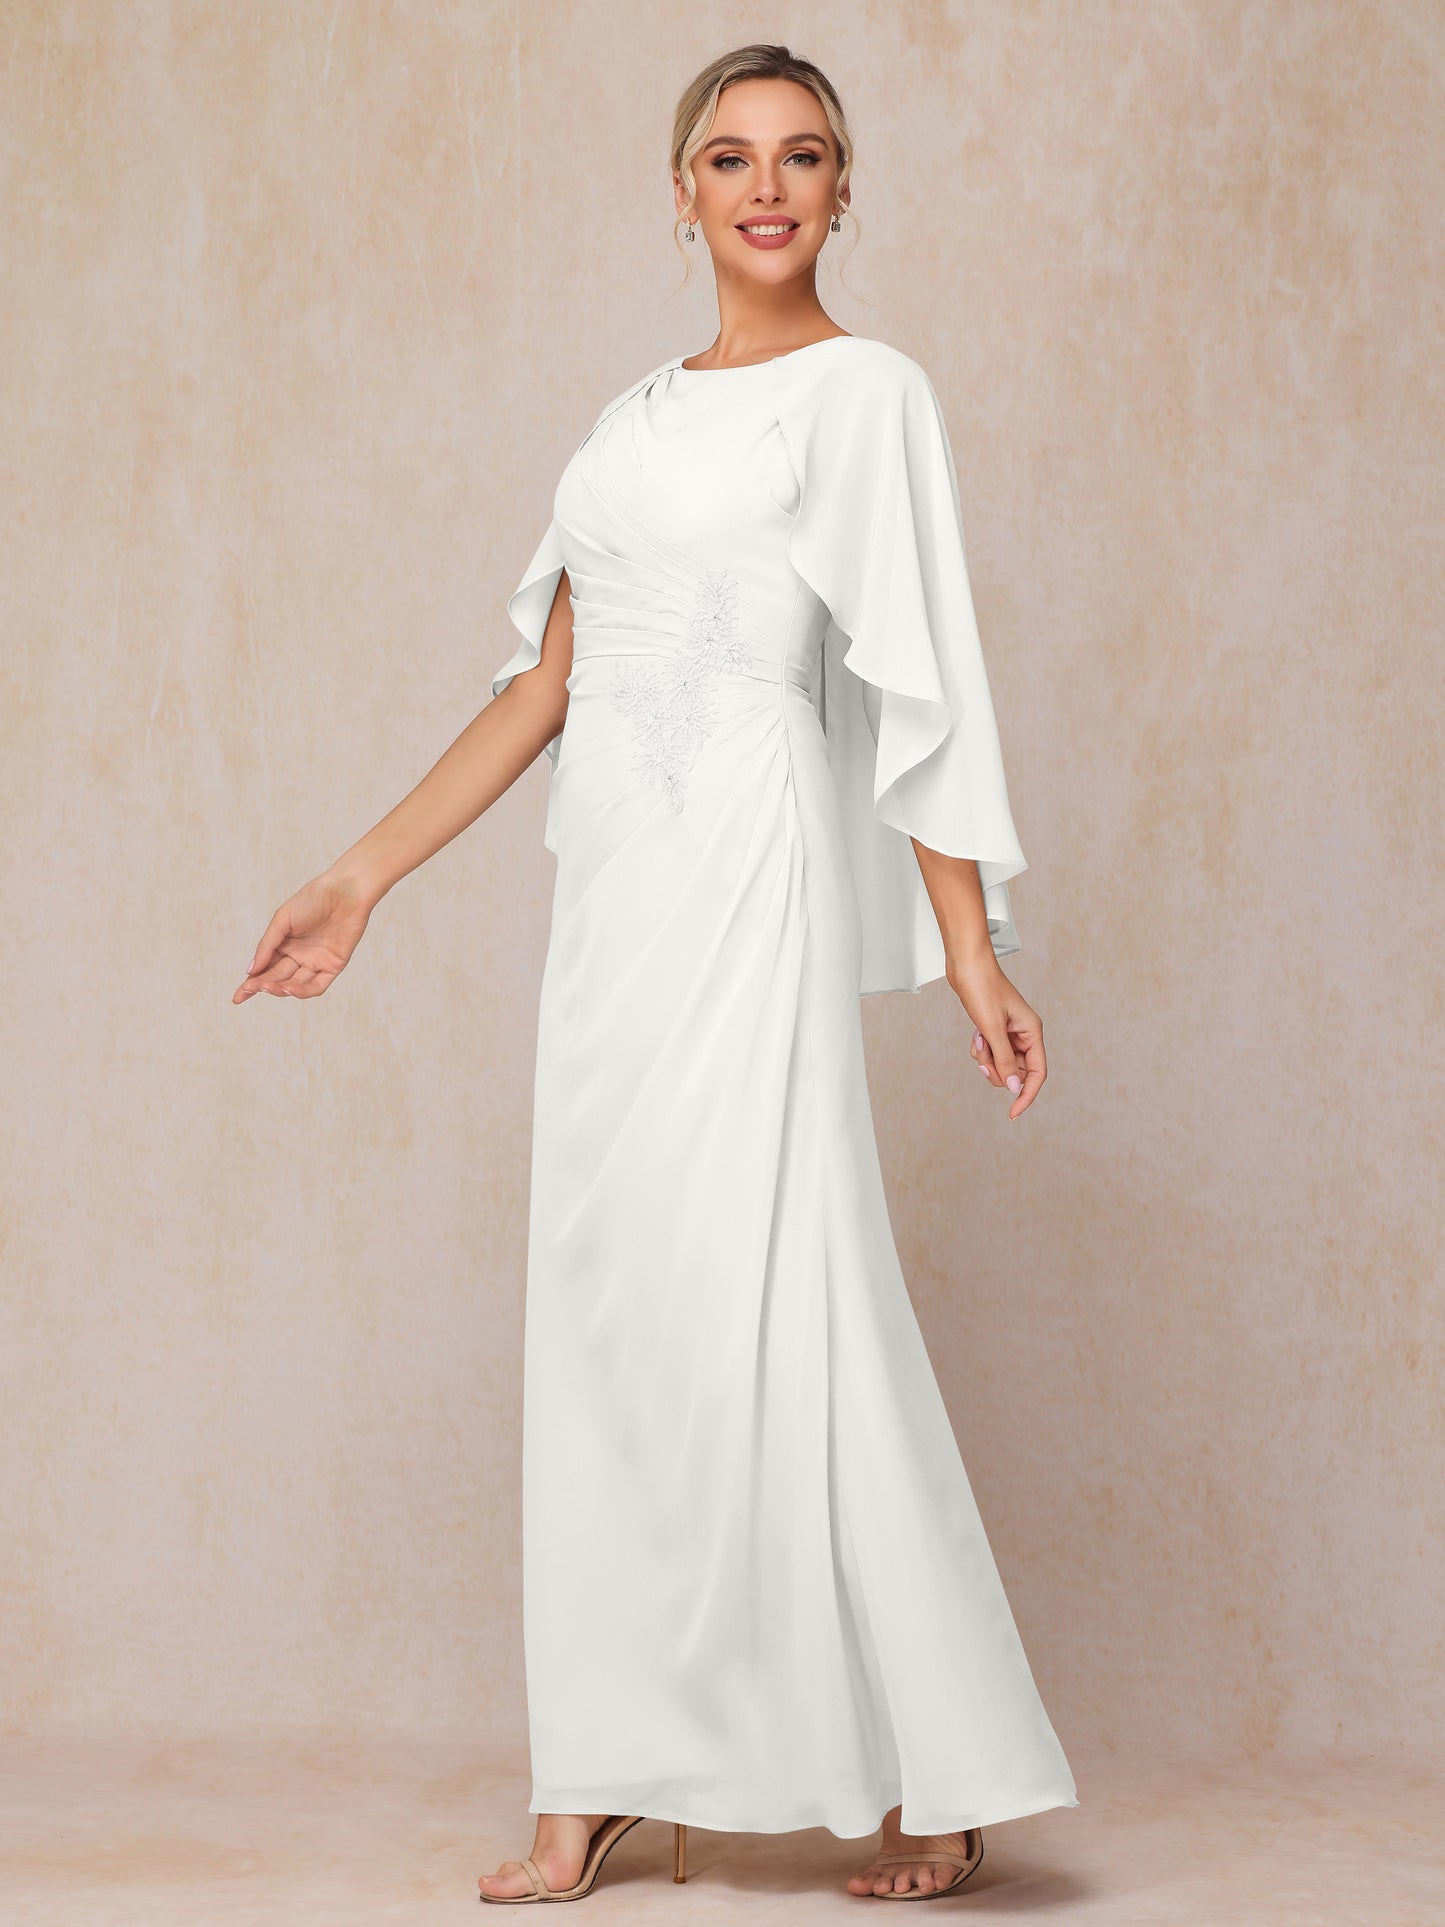 A Line Floor Length Chiffon Mother Of The Bride Dress With Cape